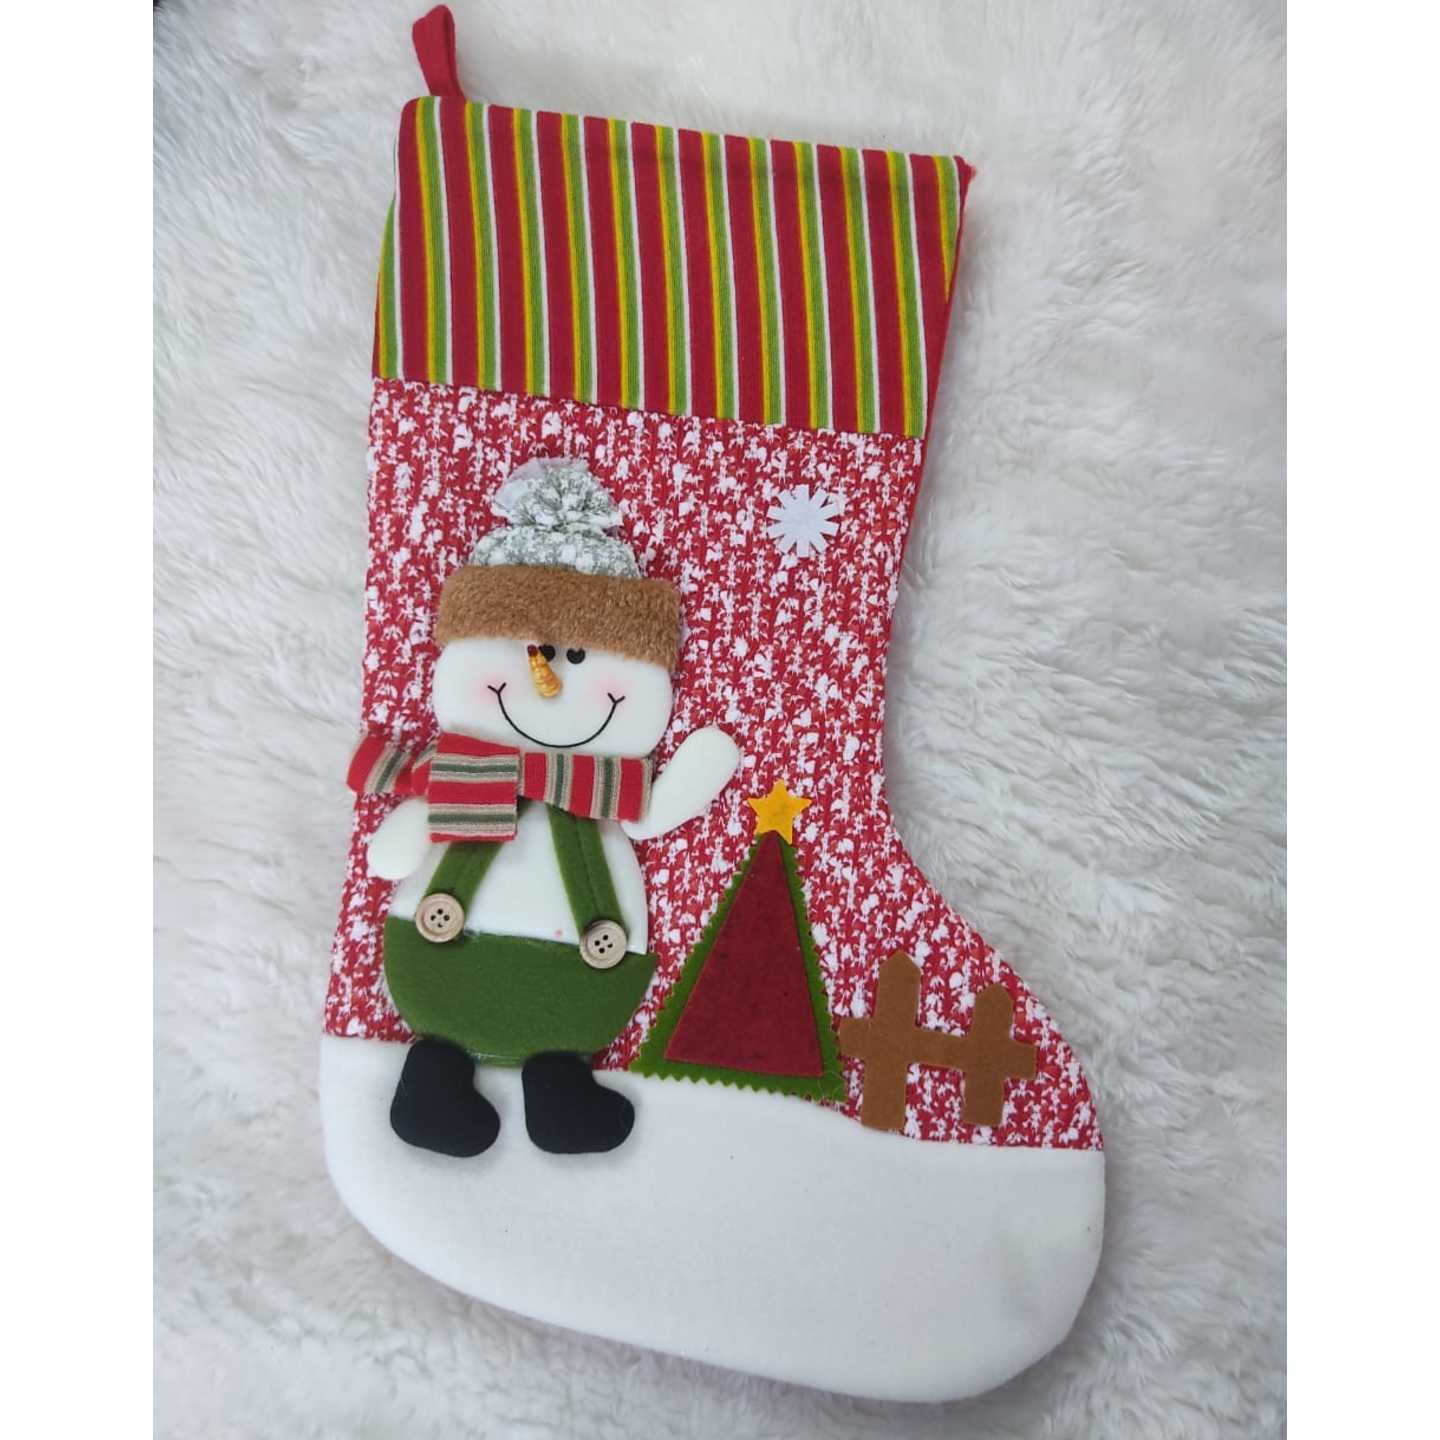 Personalised Stockings - Snowman with a tree